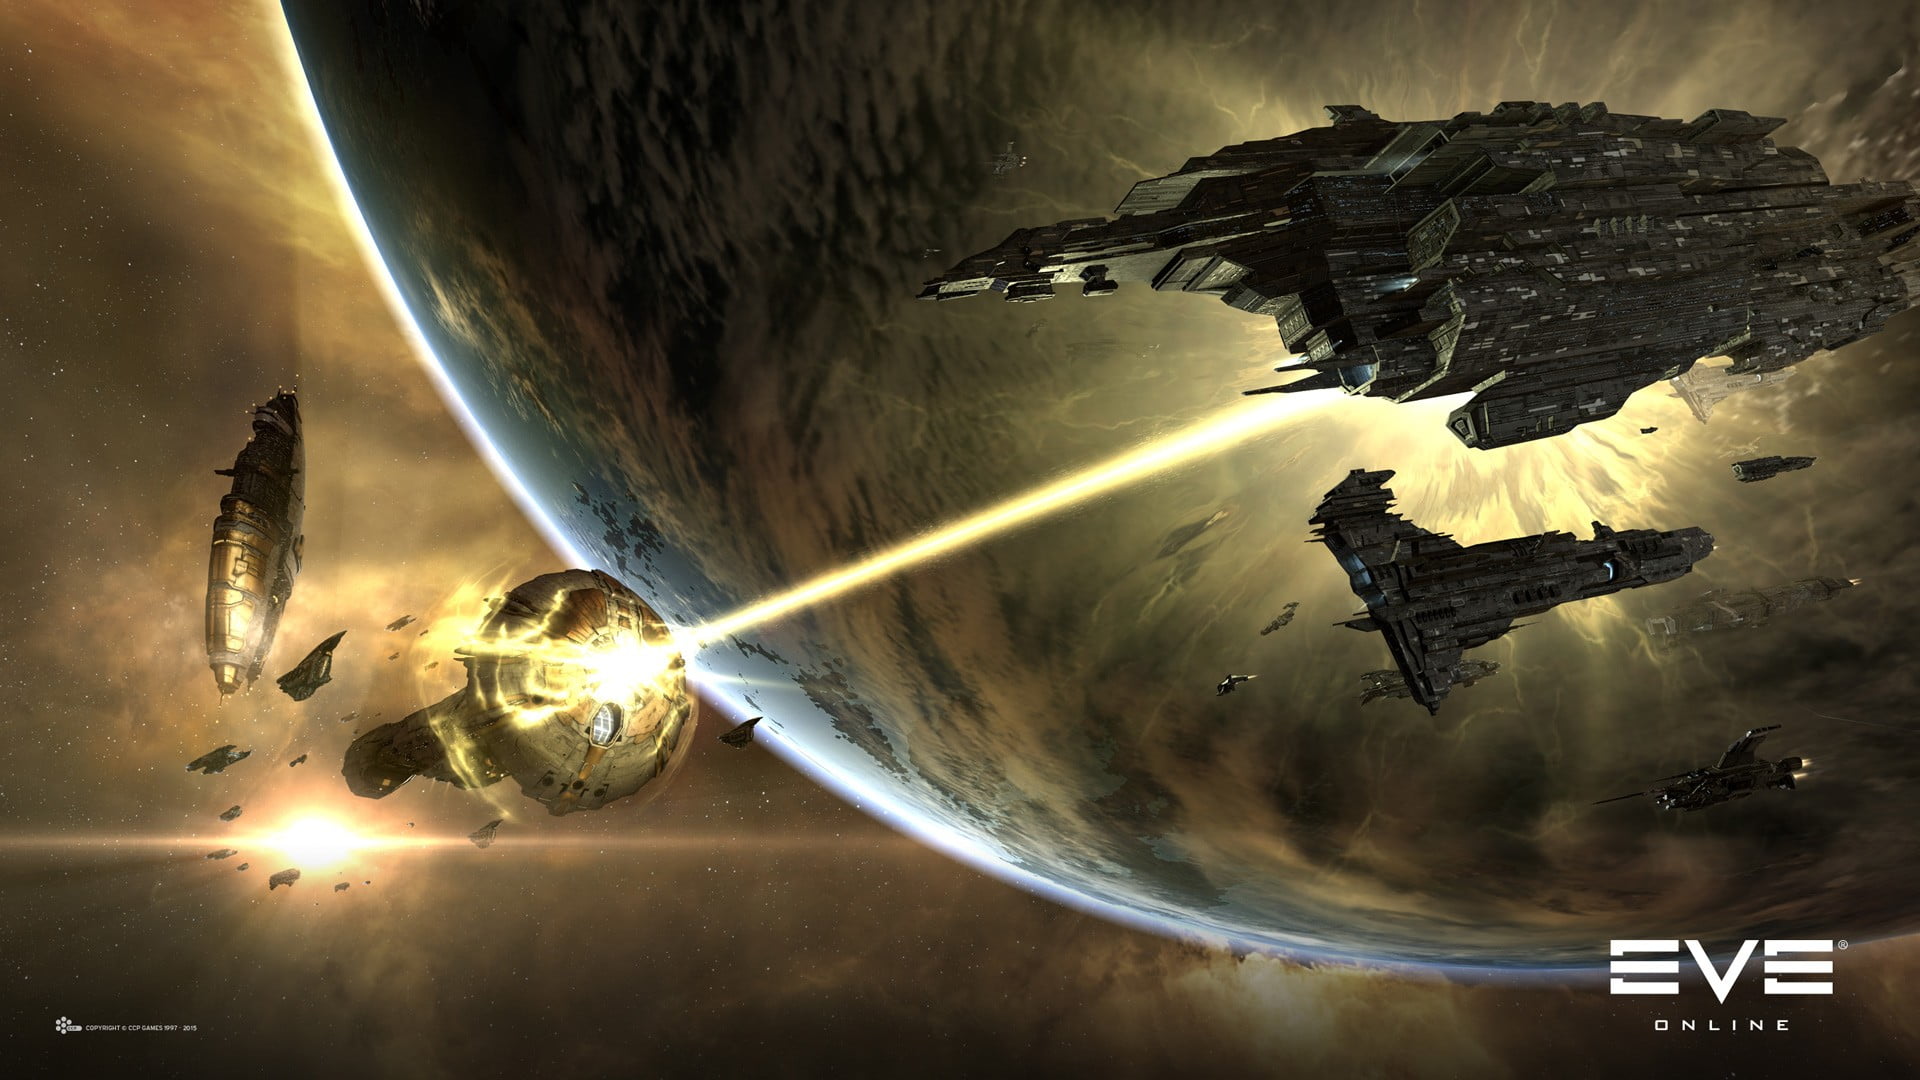 Game Eve online Wallpaper ID941